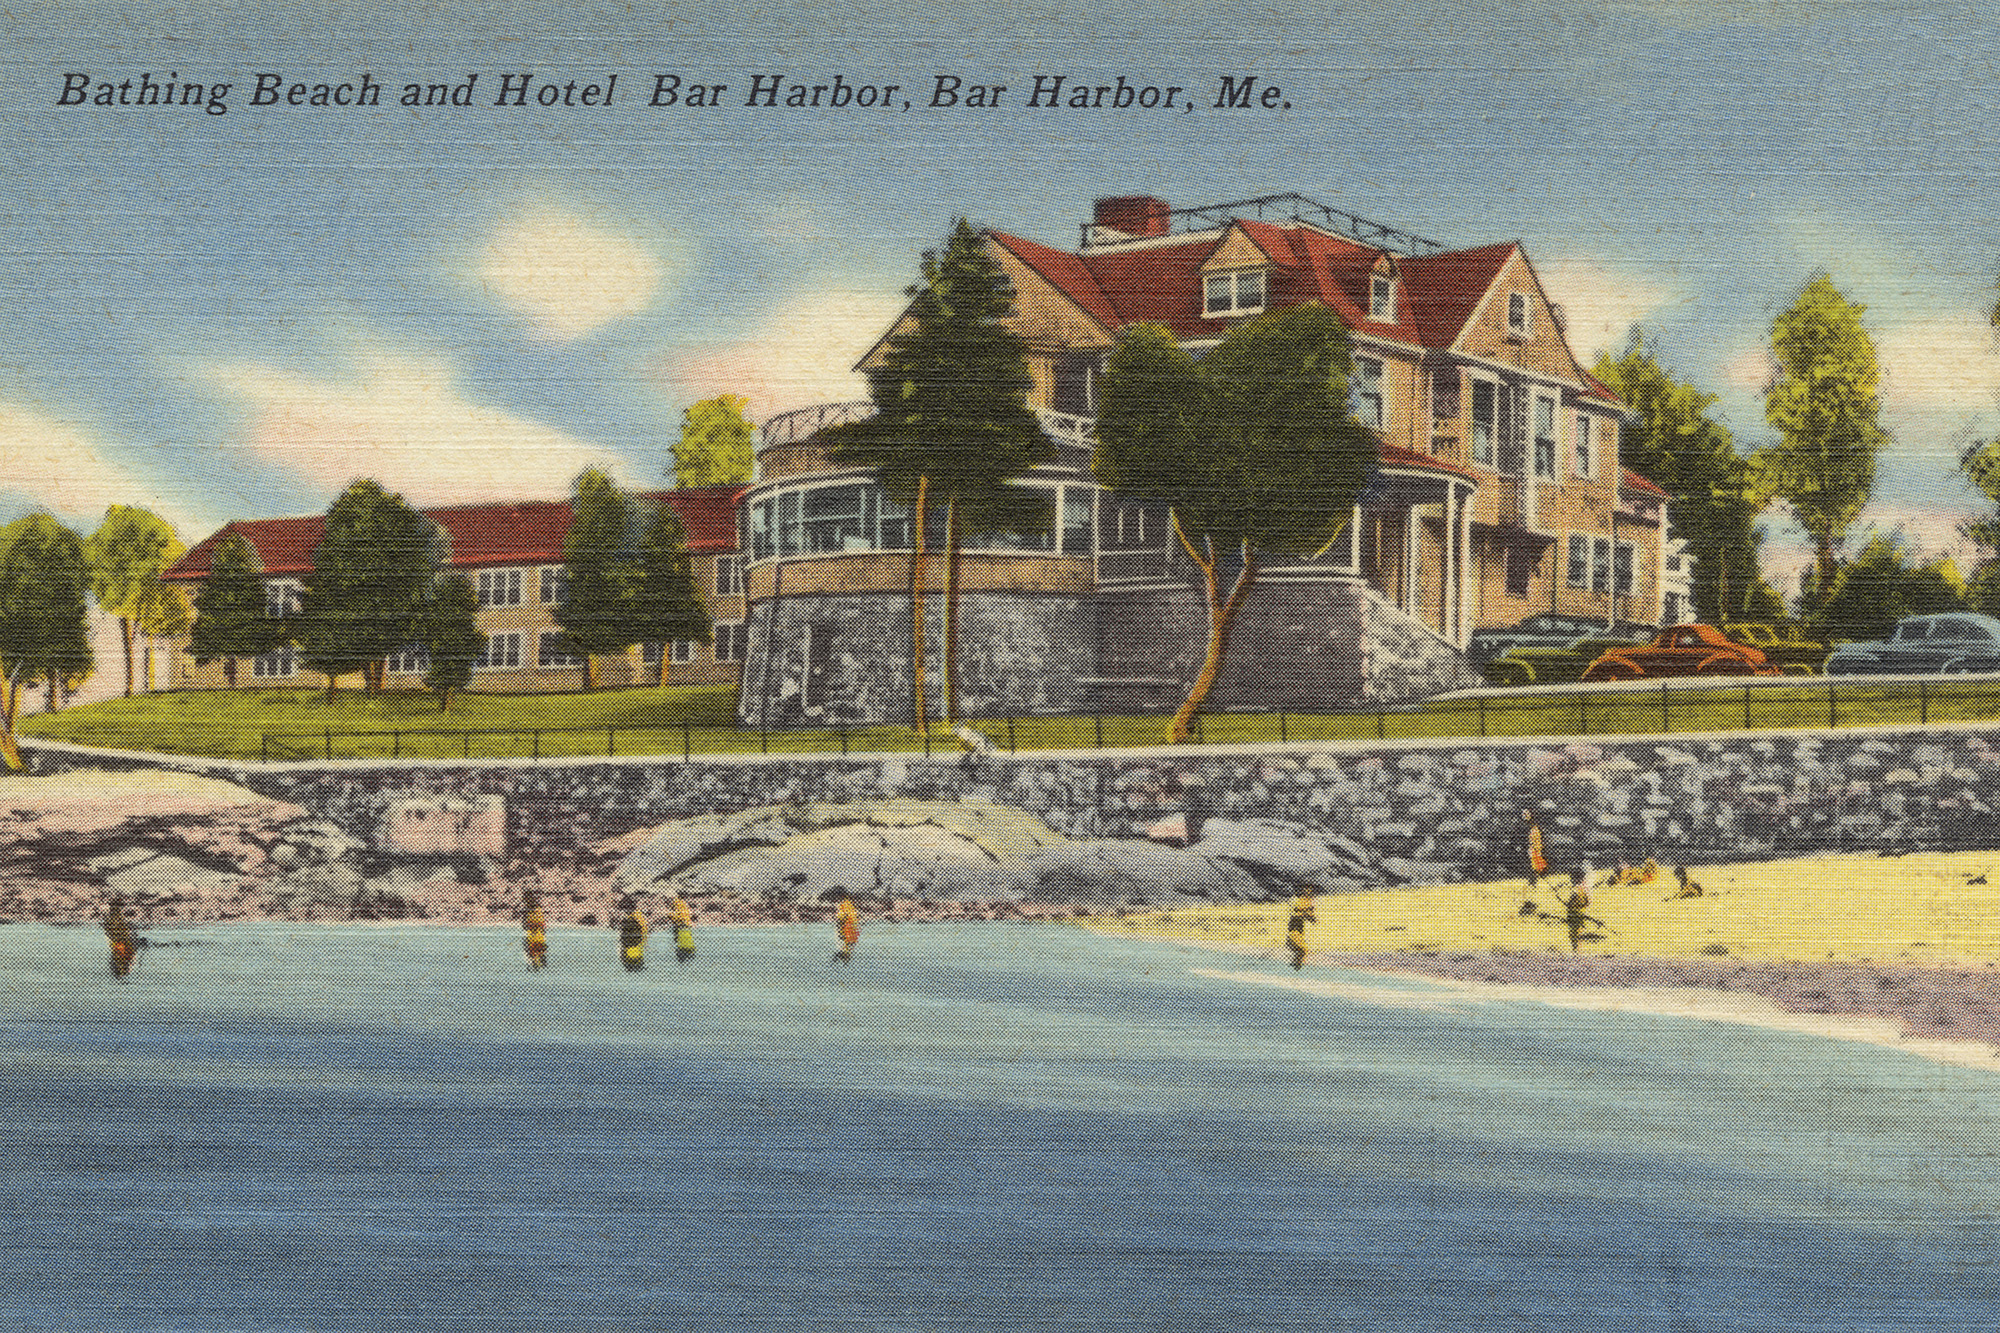 Historic image of Hotel Bar Harbor. Boston Public Library, Tichnor Brothers Collection.